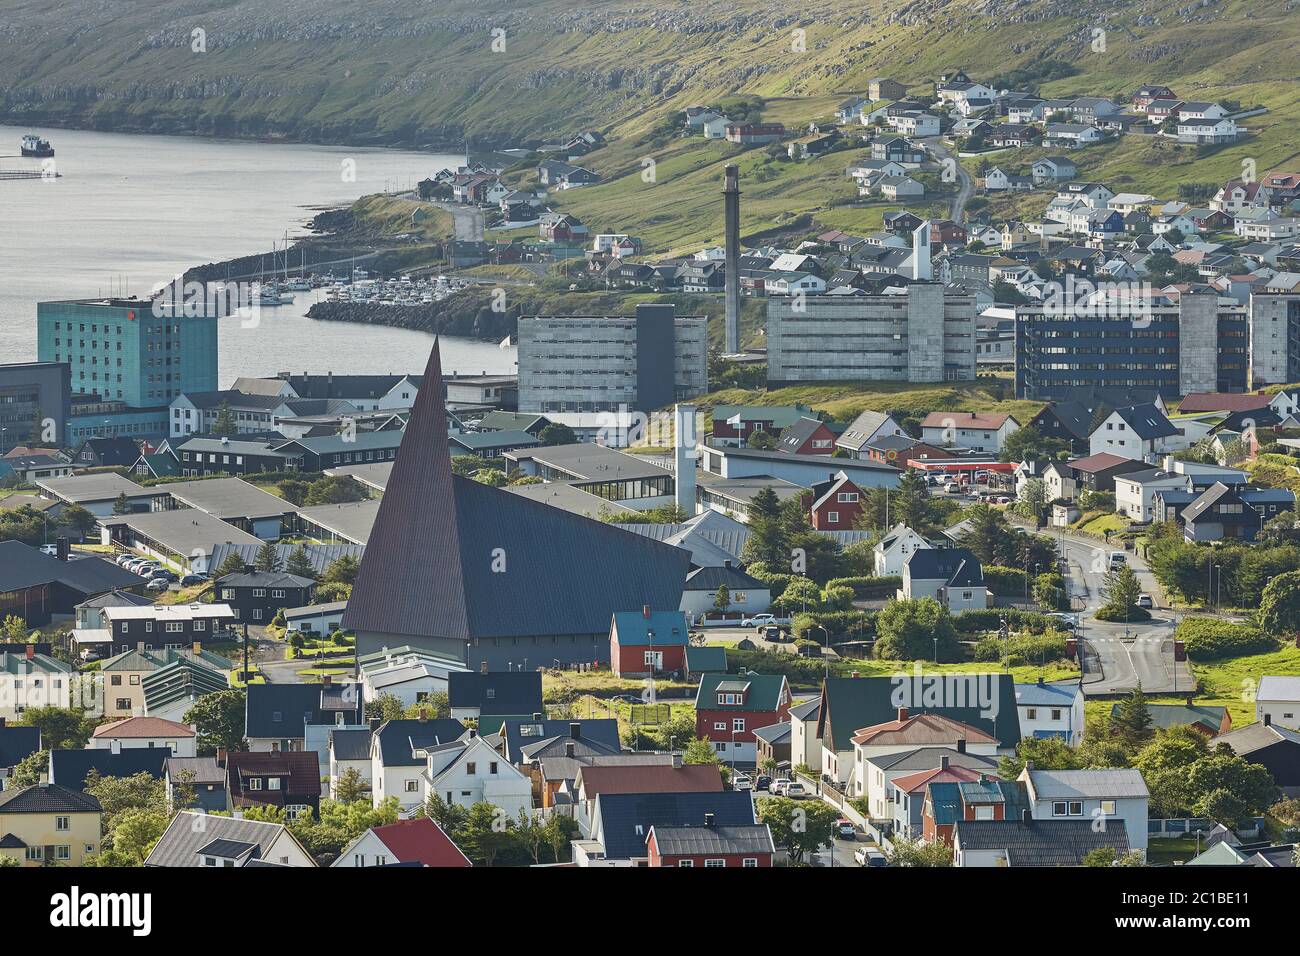 Torshavn, Capital of Faroe Islands with its downtown area and port in bay Stock Photo